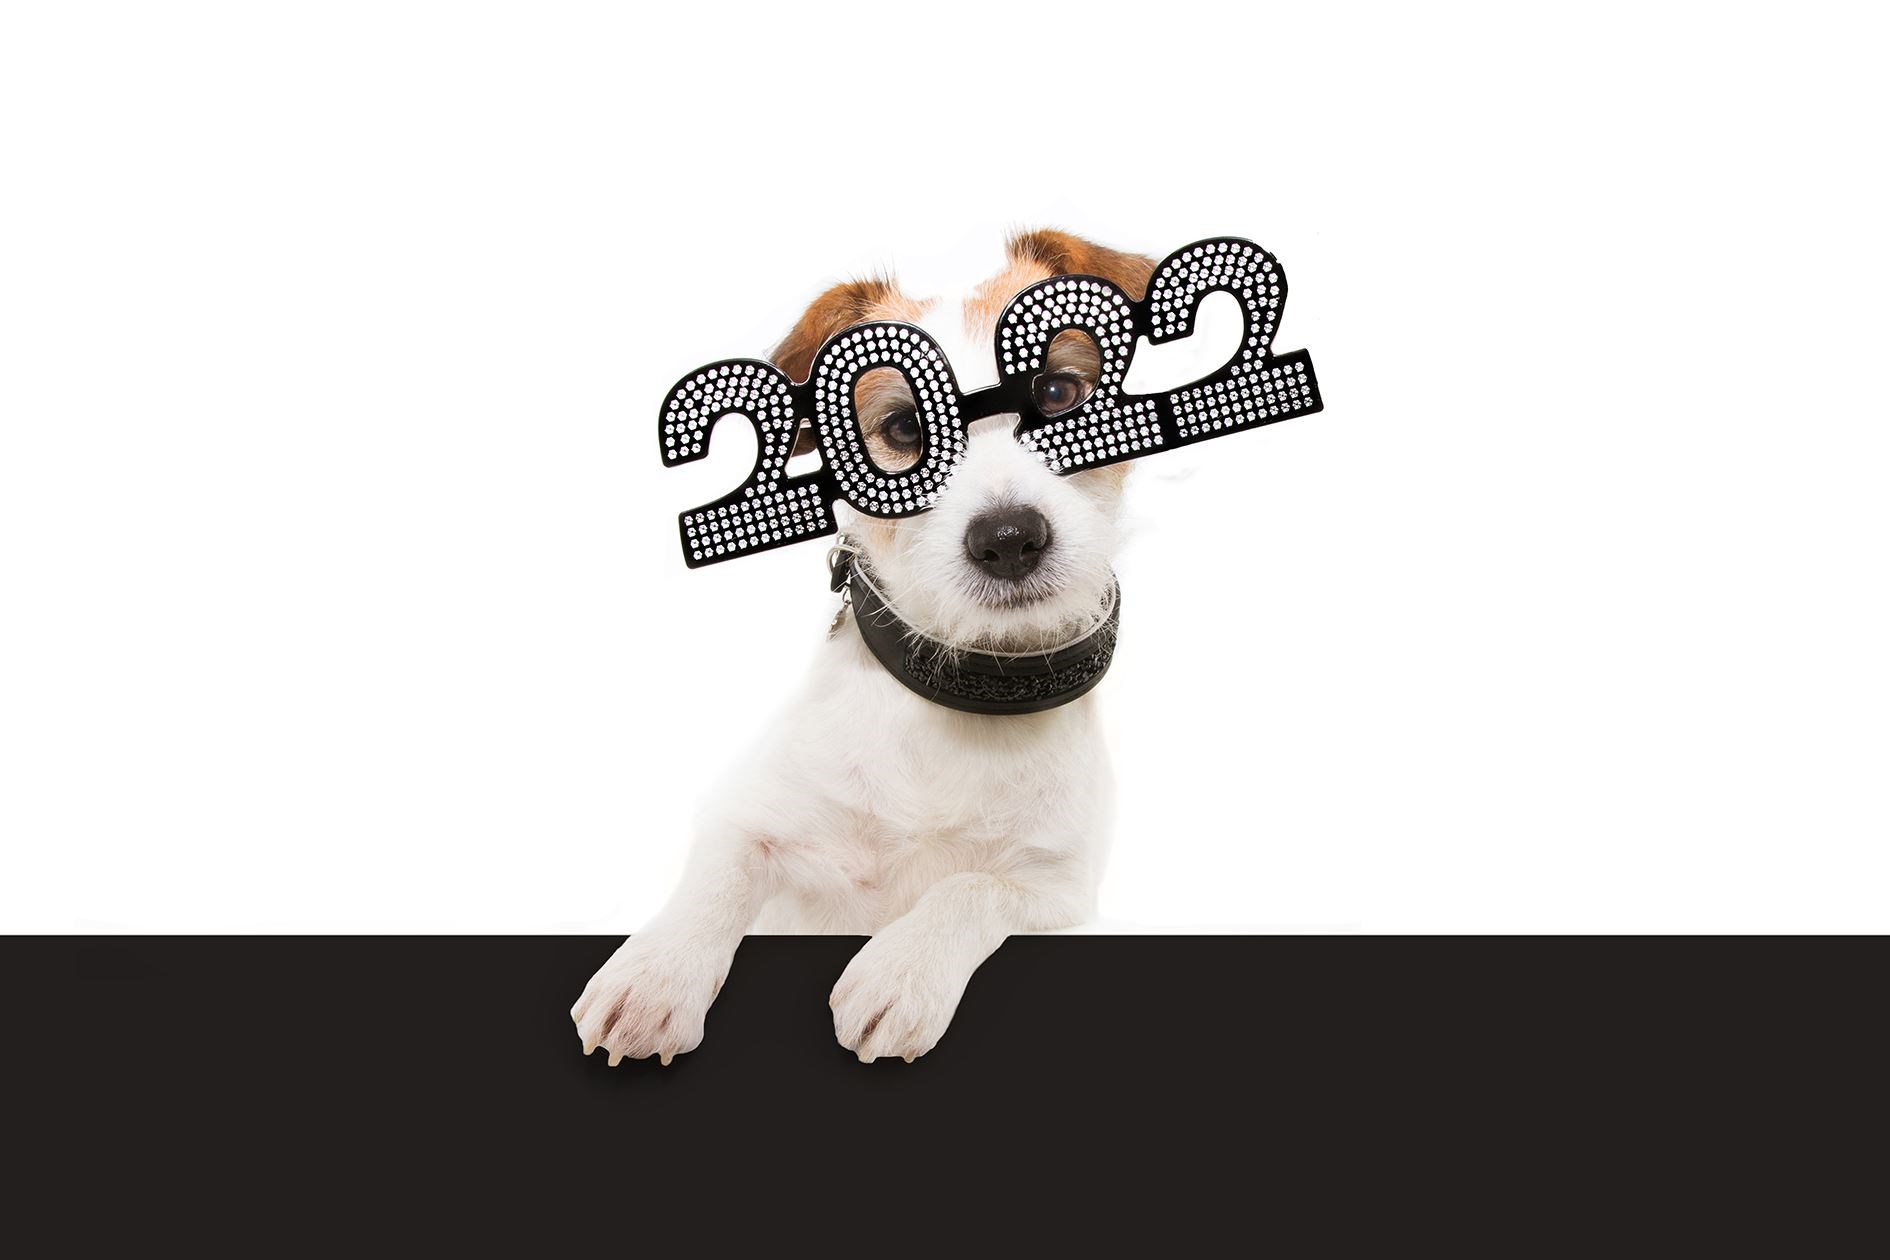 You'd be barking made to not celebrate the start of a new year.